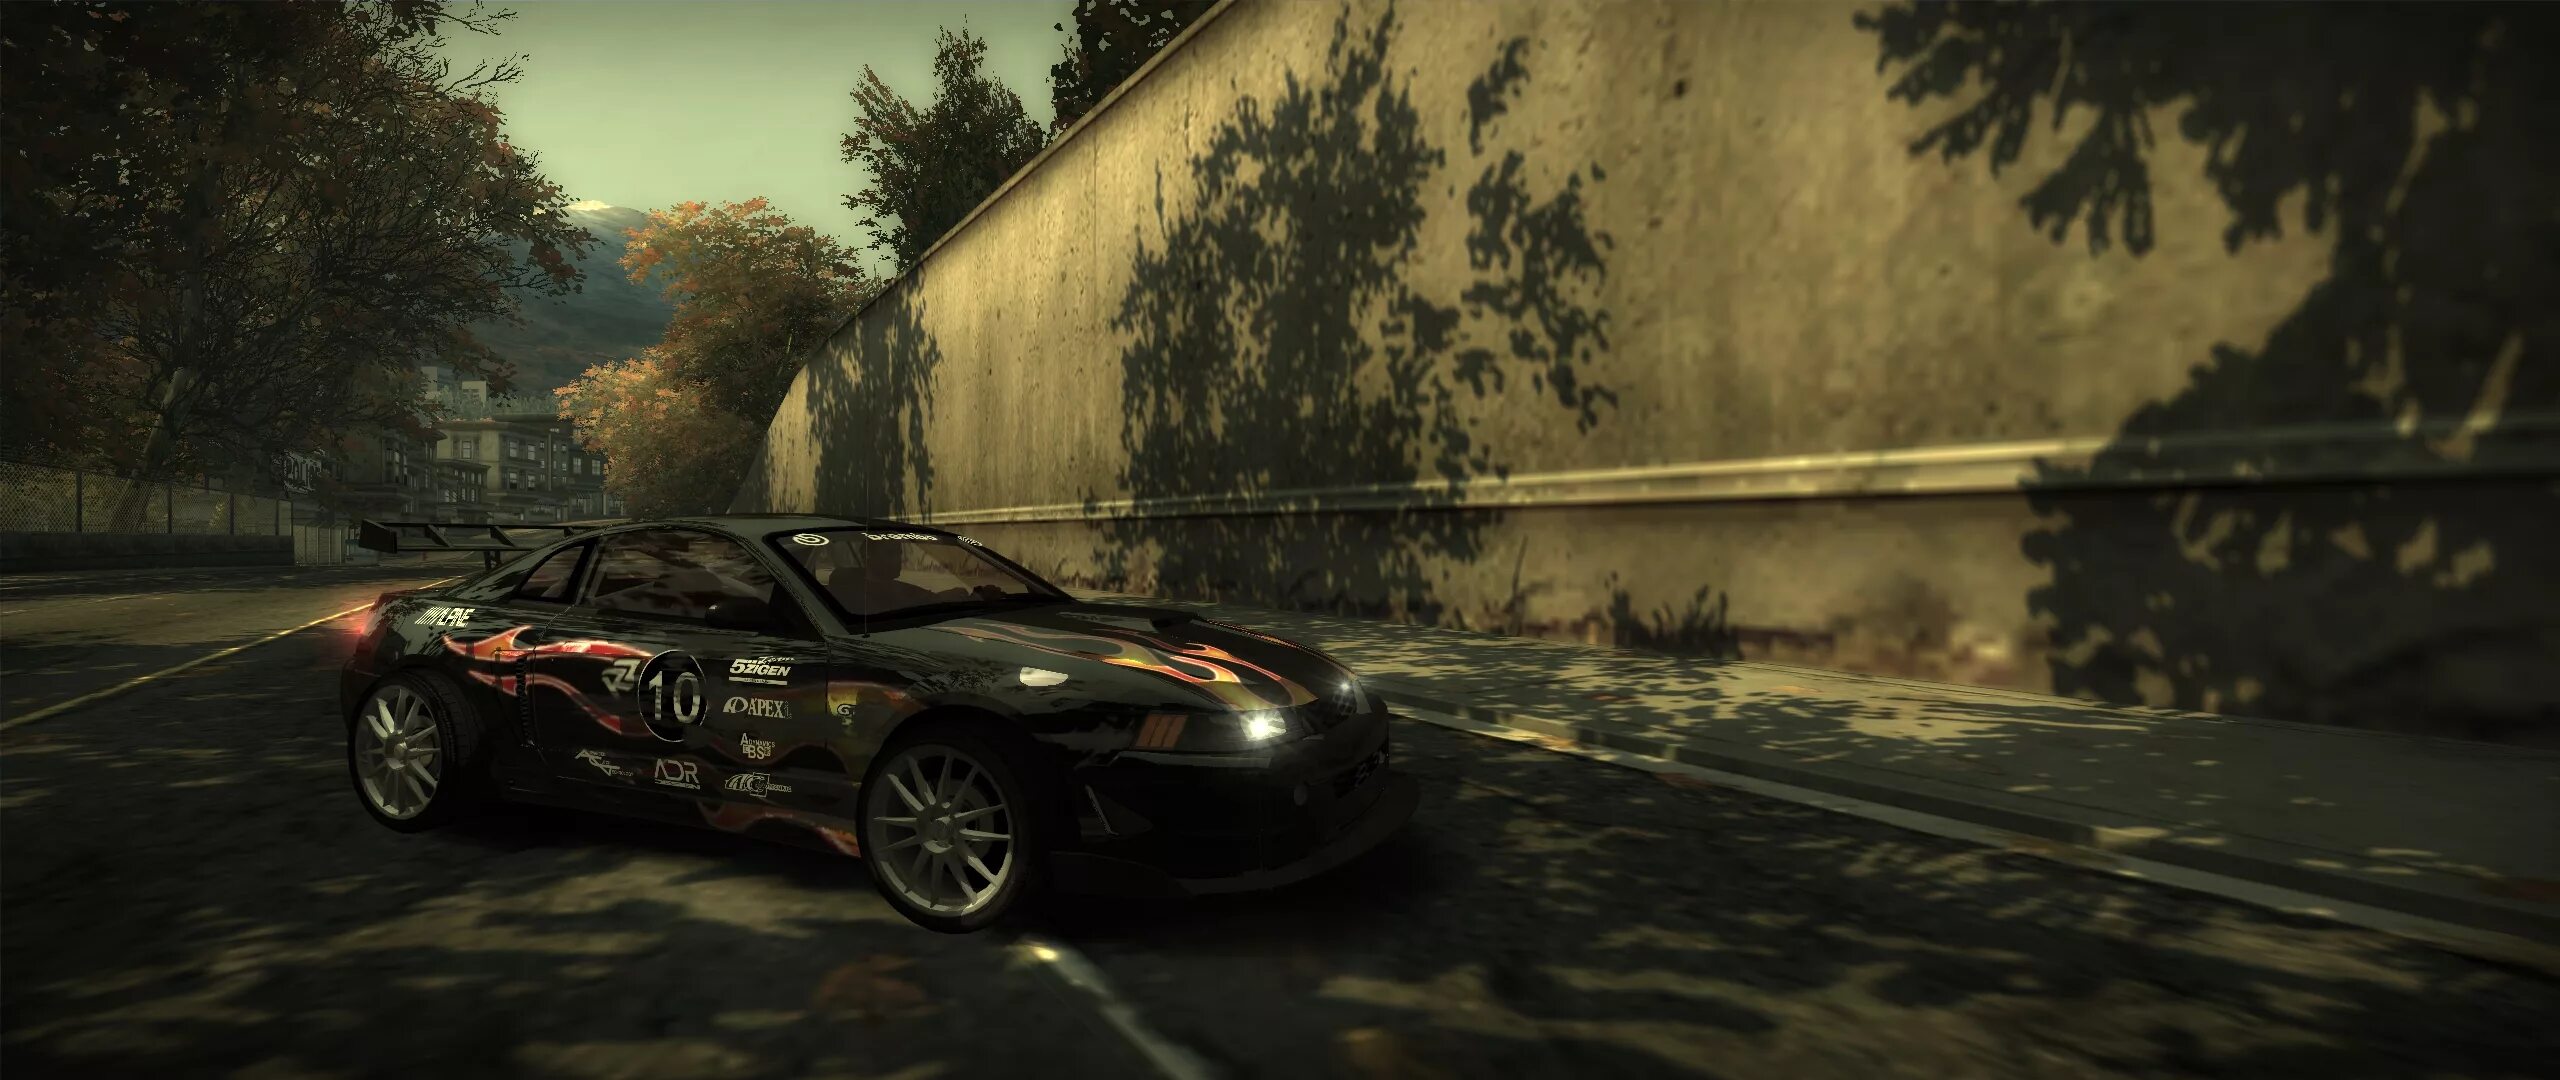 Need for Speed most wanted Мустанг. Нфс мост вантед 2005. Из need for Speed most wanted 2005. Мост вантед 350z. Nfs mw сохранения